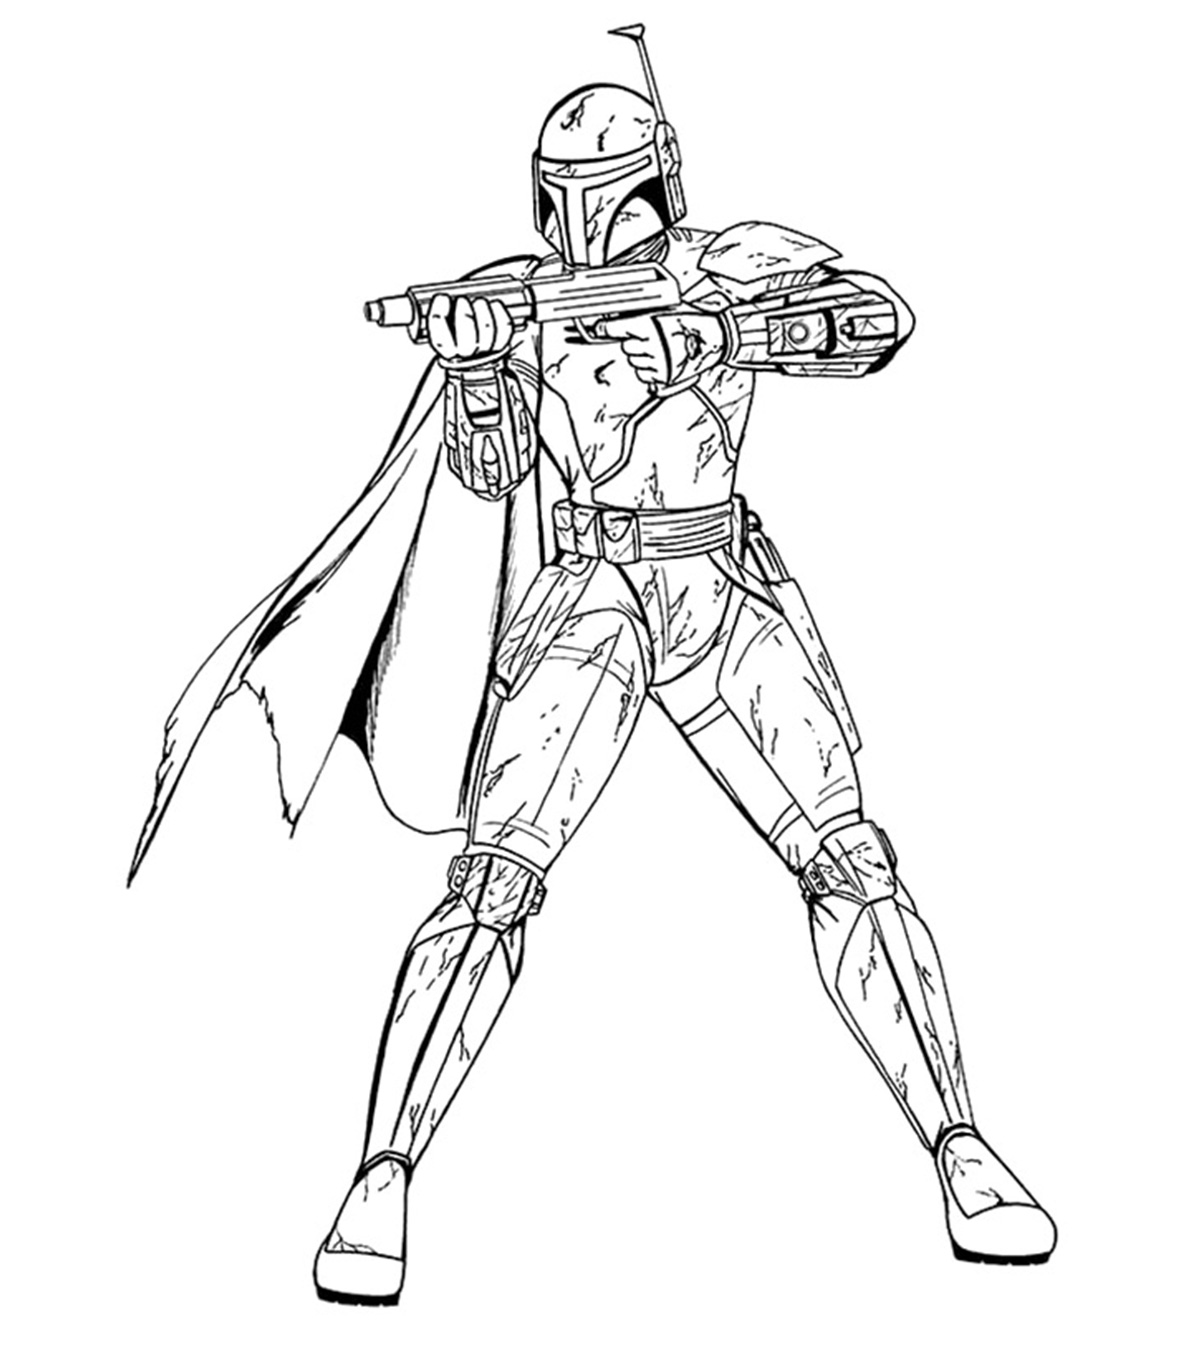 From star wars, boba fett bounty hunter coloring page. 